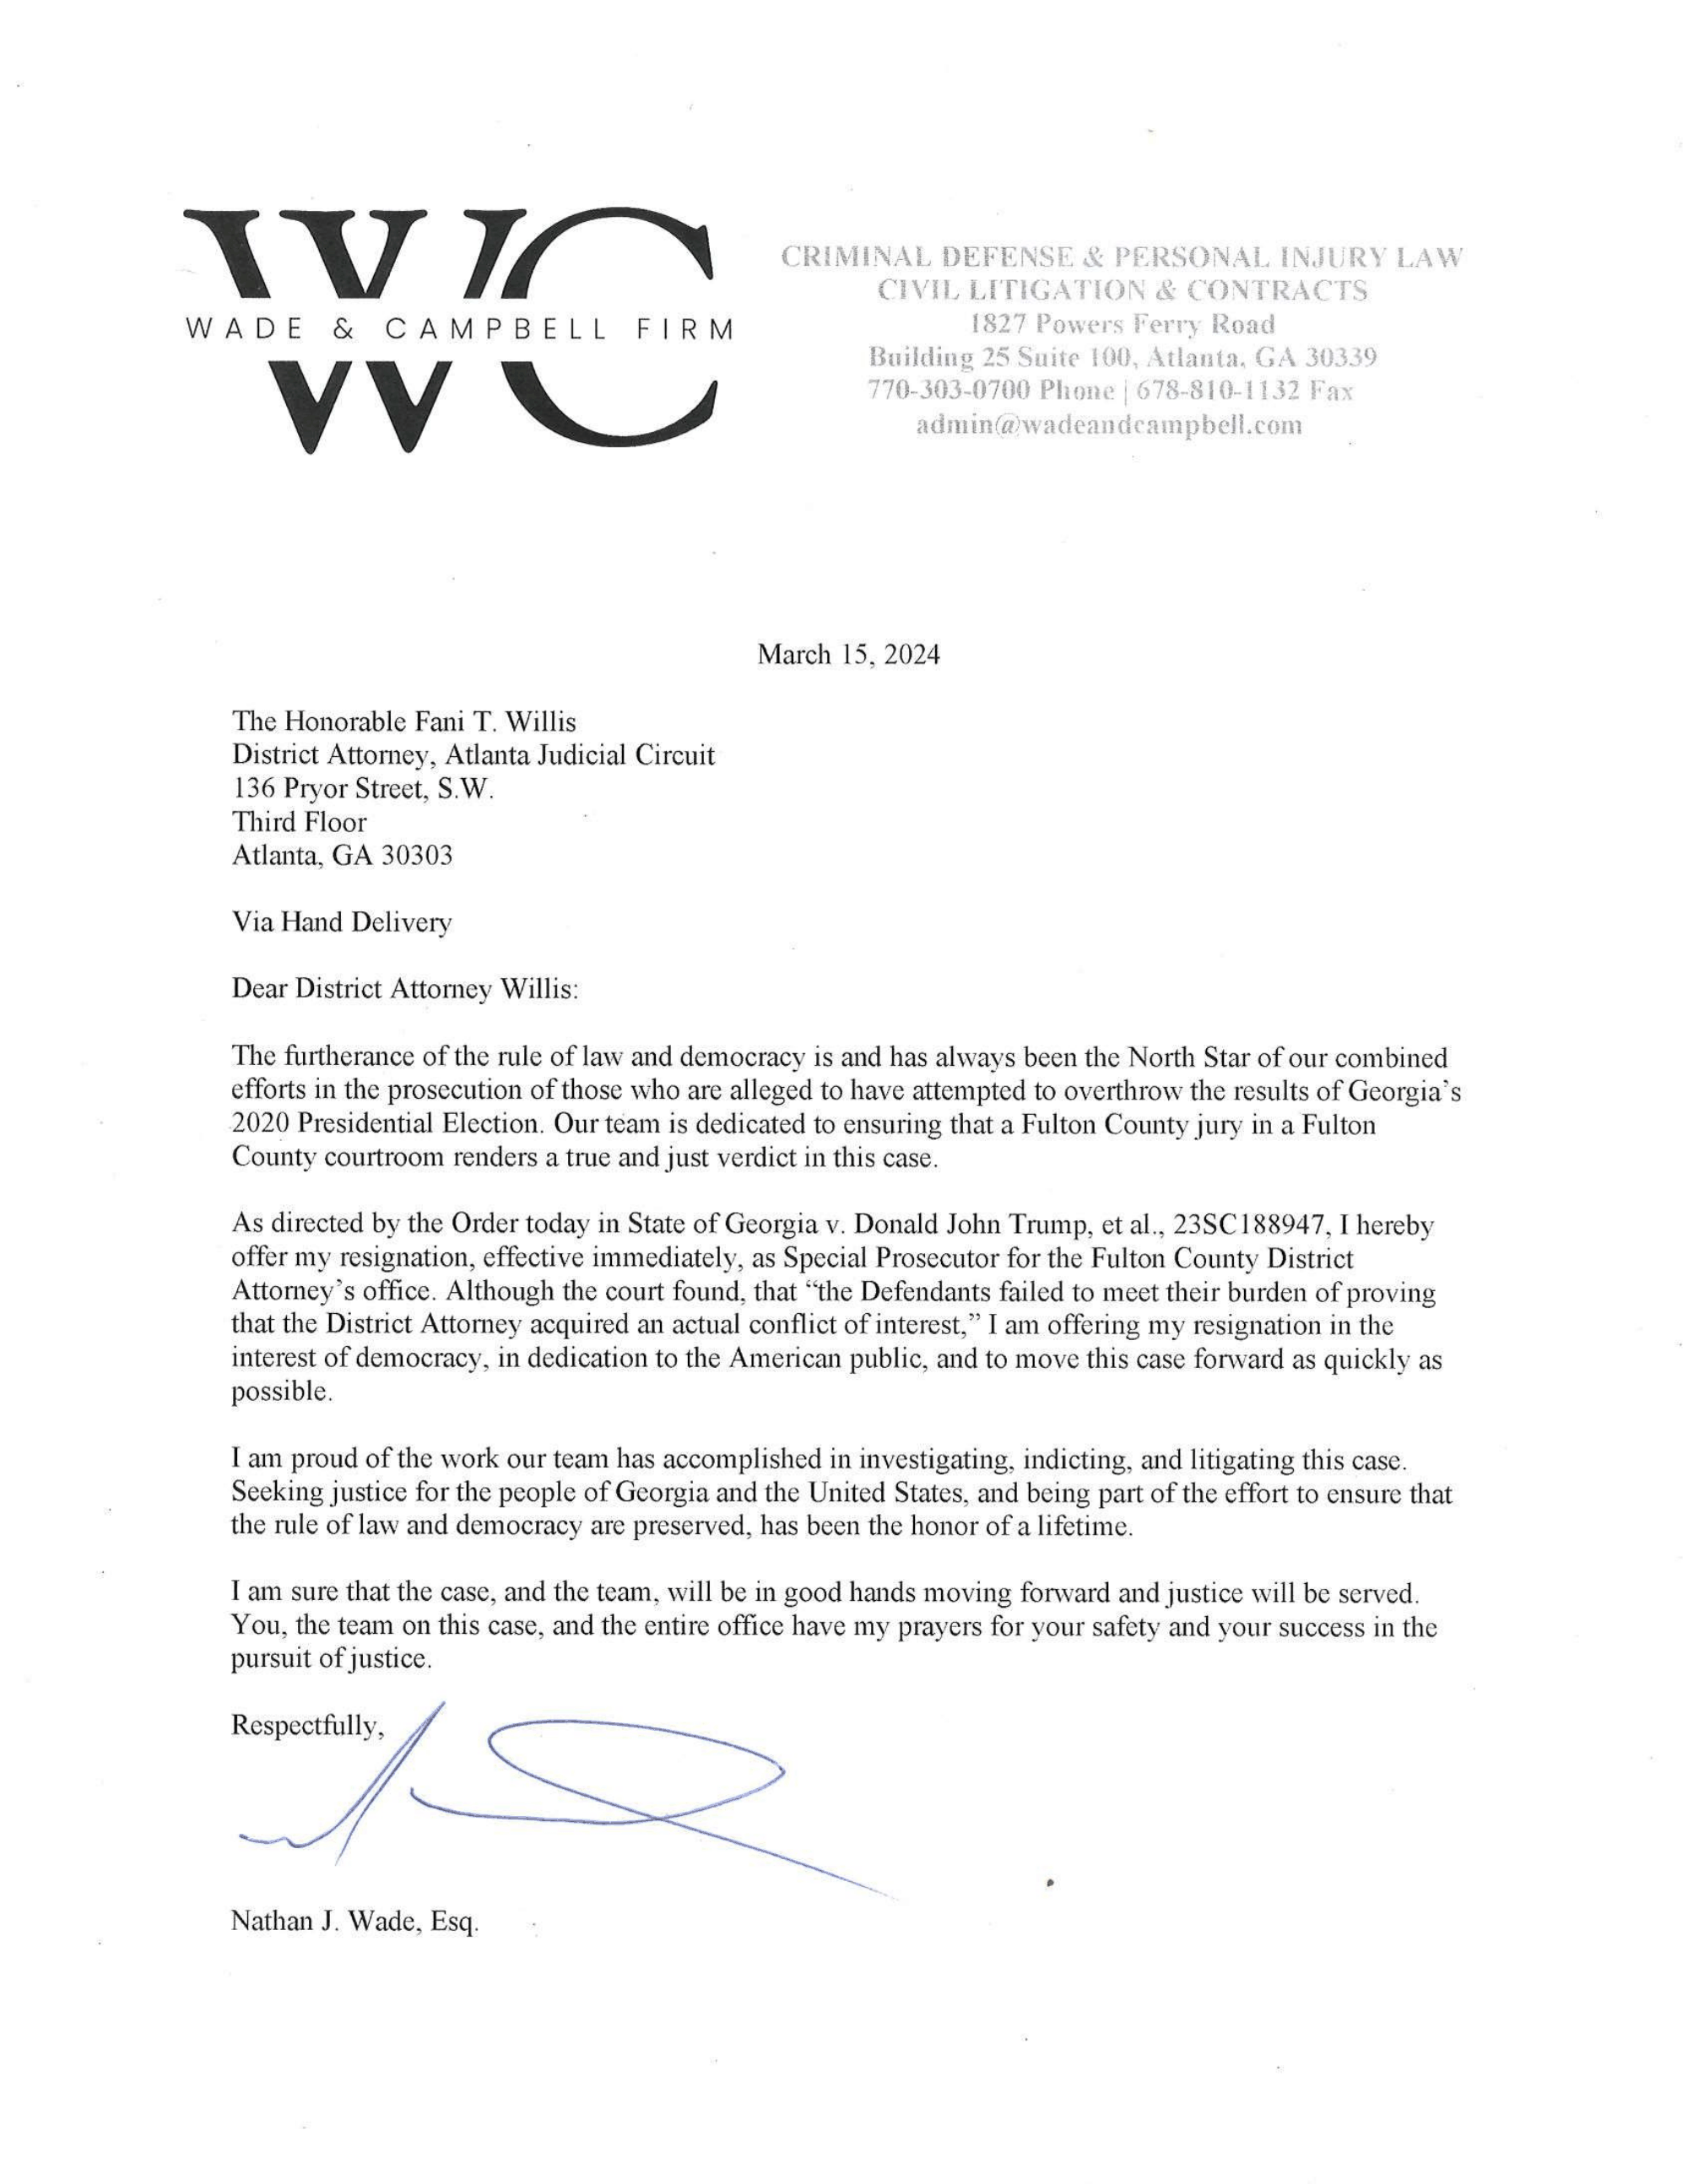 Page 1 of NJW resignation letter 3-15-24